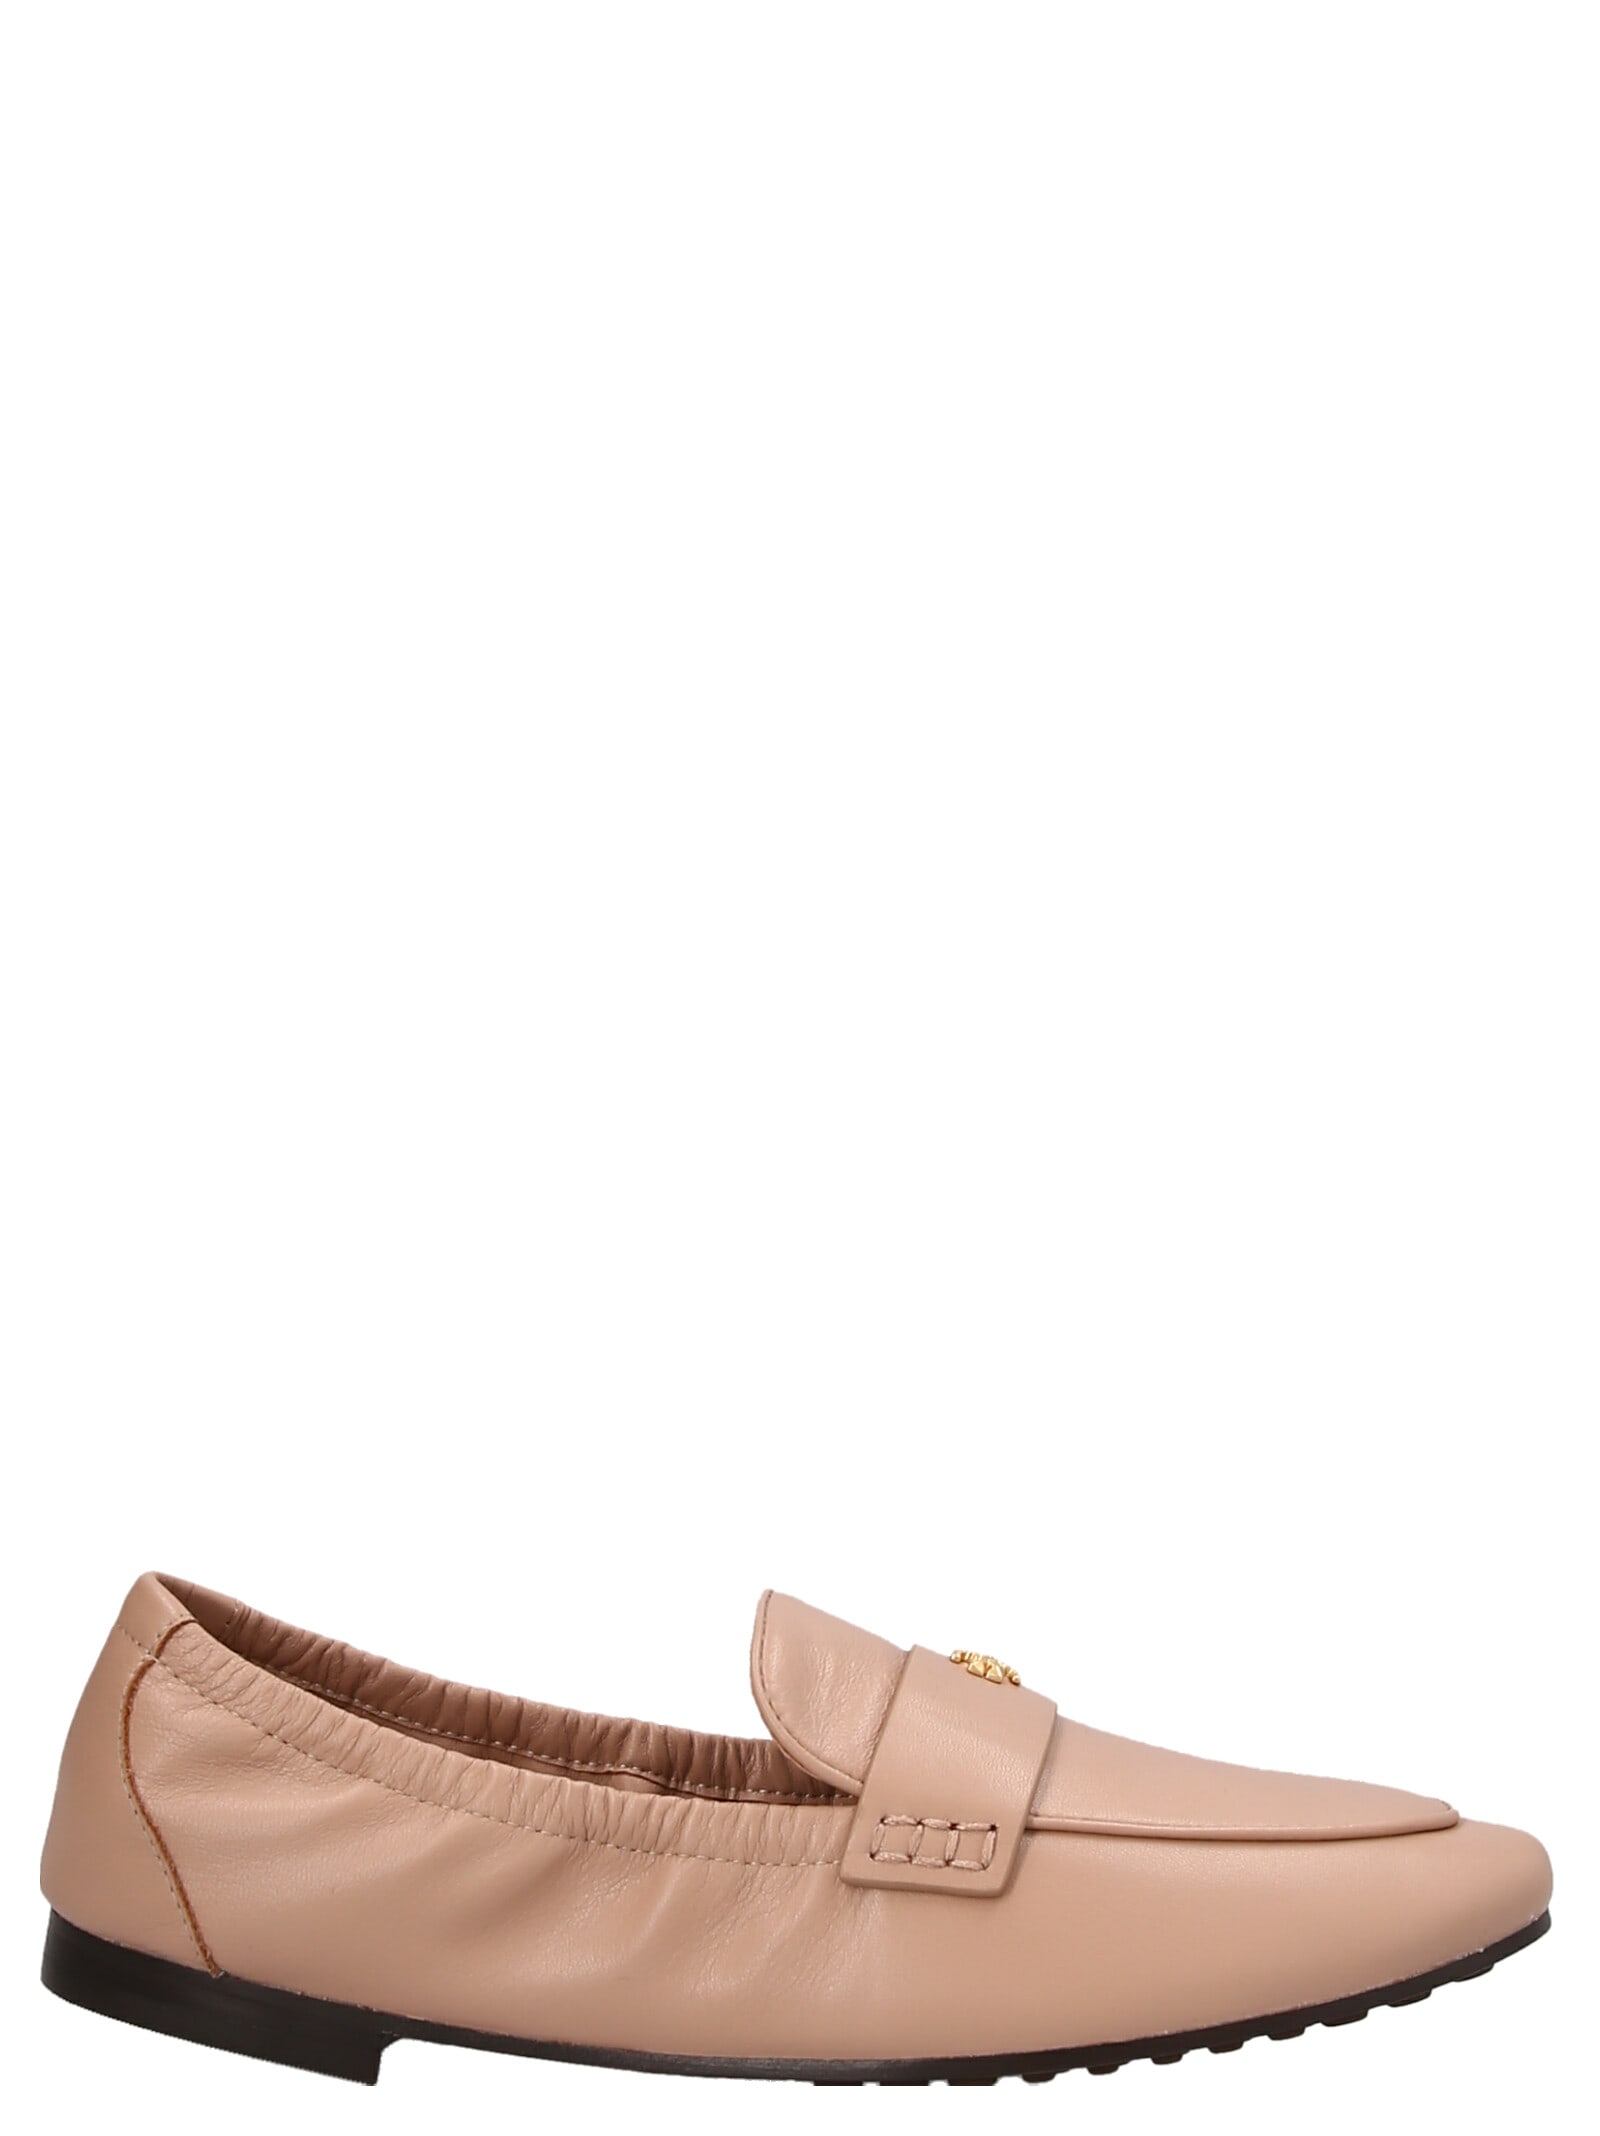 TORY BURCH BALLET LOAFERS